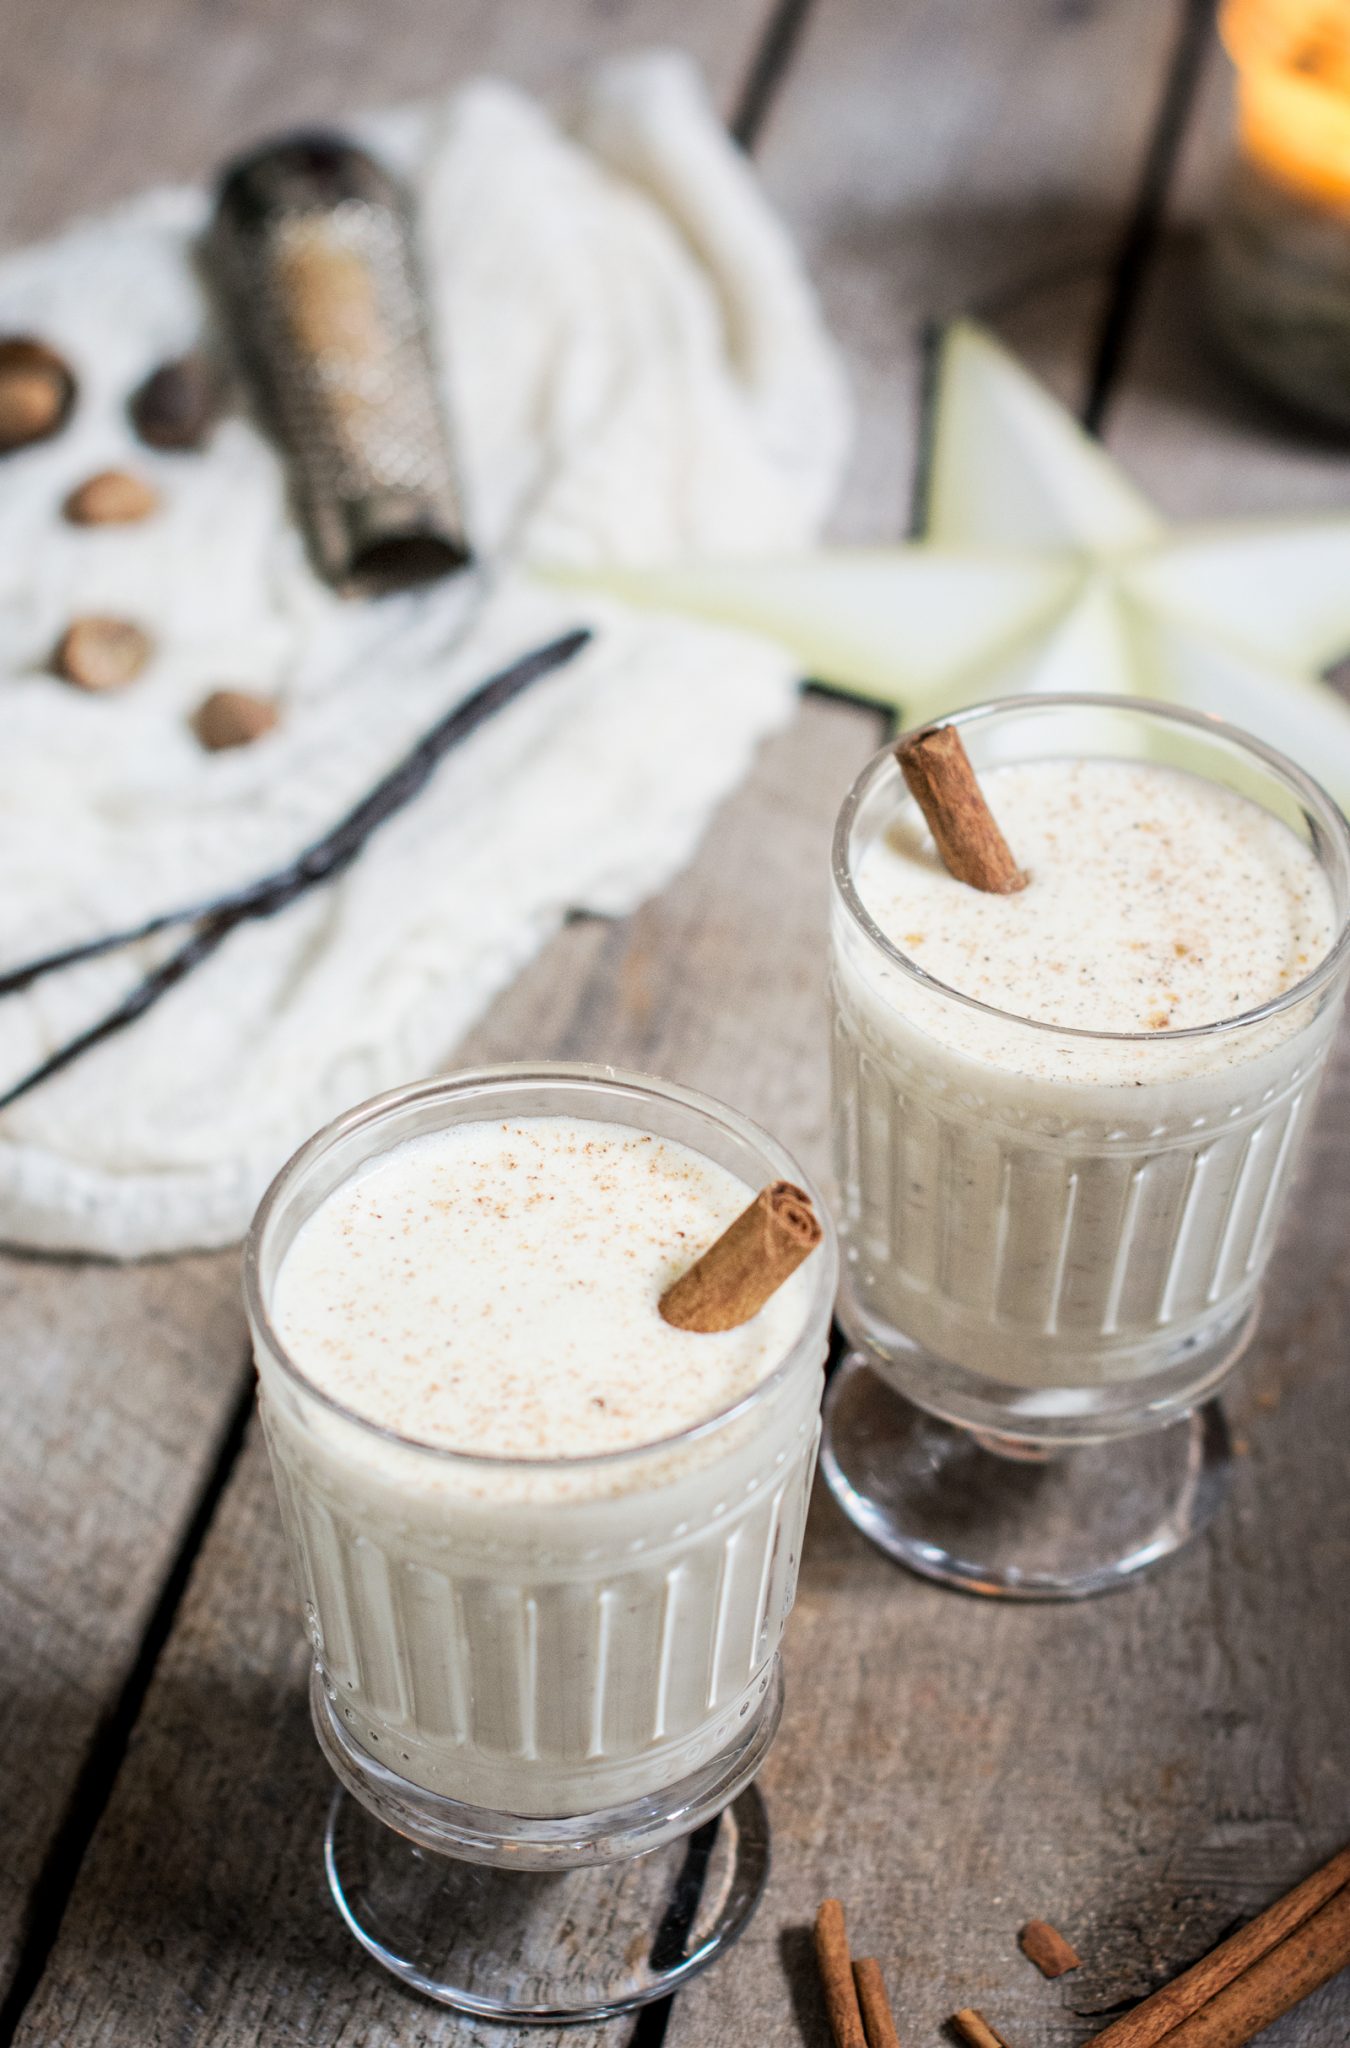 Creamy Boozy Eggnog, perfect for celebrating the holidays! Get the recipe at Little Figgy Food!